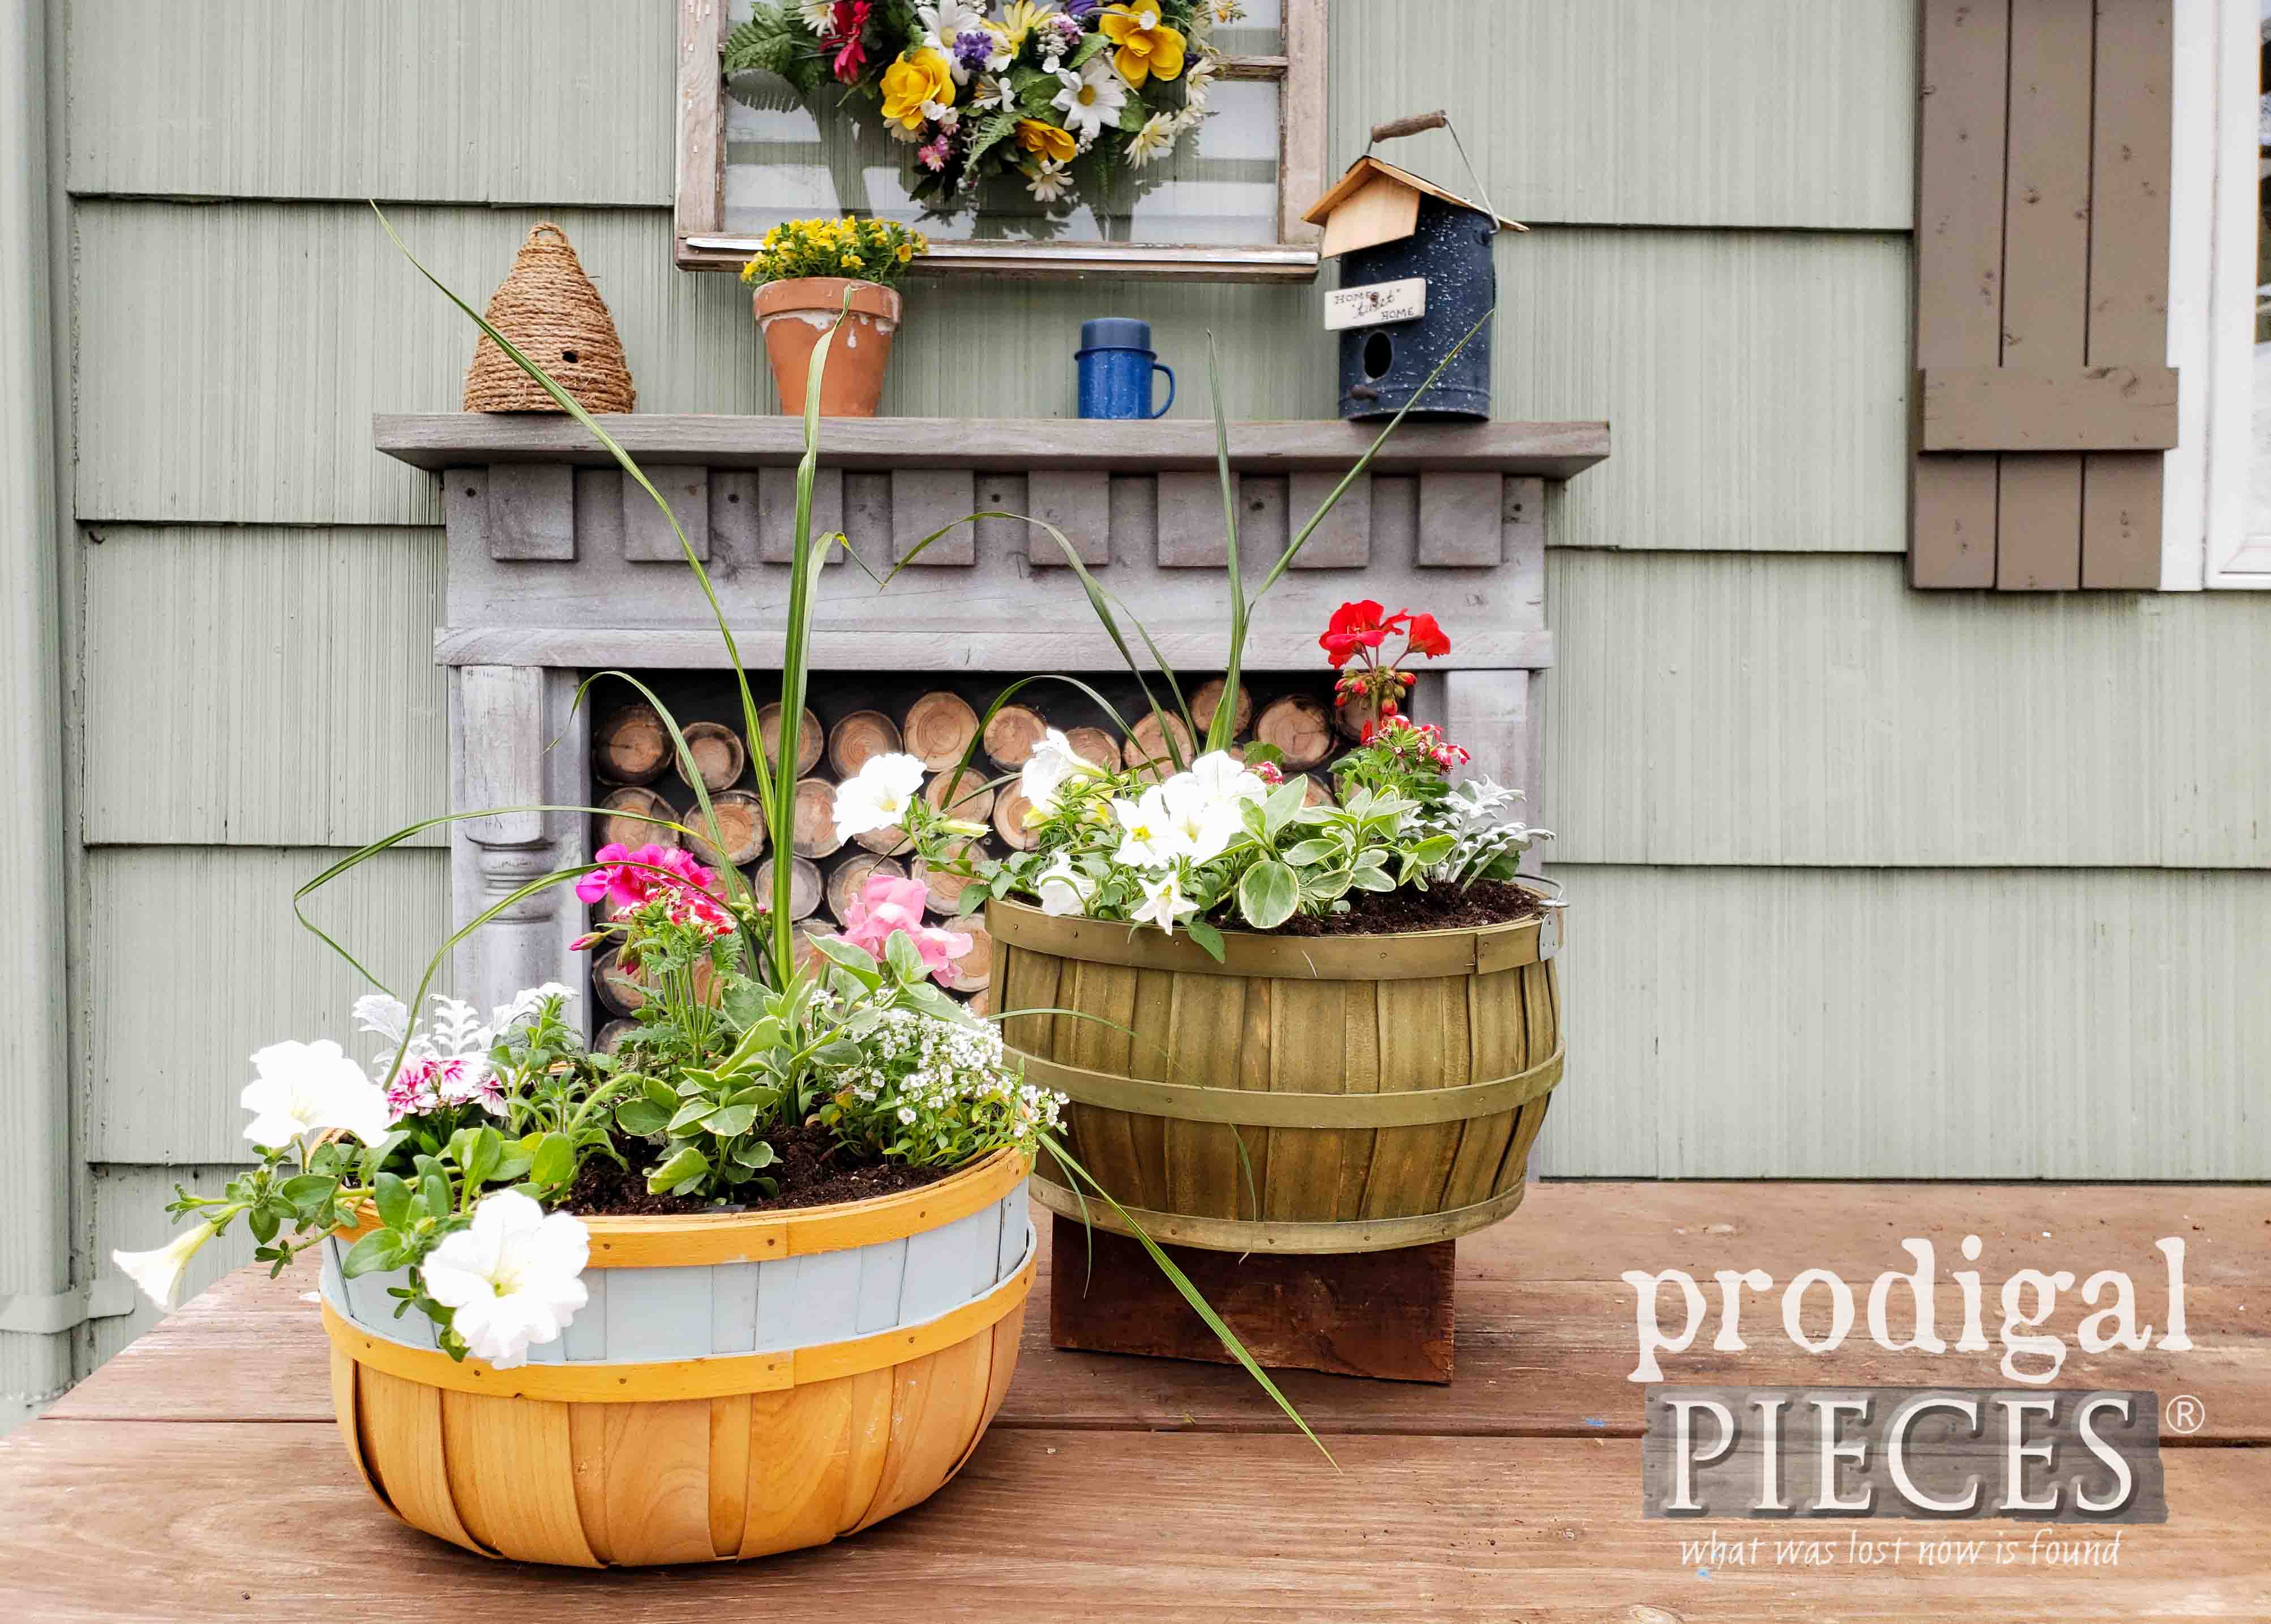 DIY Mothers Day Flower Basket with Video Tutorial by Larissa of Prodigal Pieces | prodigalpieces.com #prodigalpieces #mothersday #diy #giftideas #flowers #garden #home 